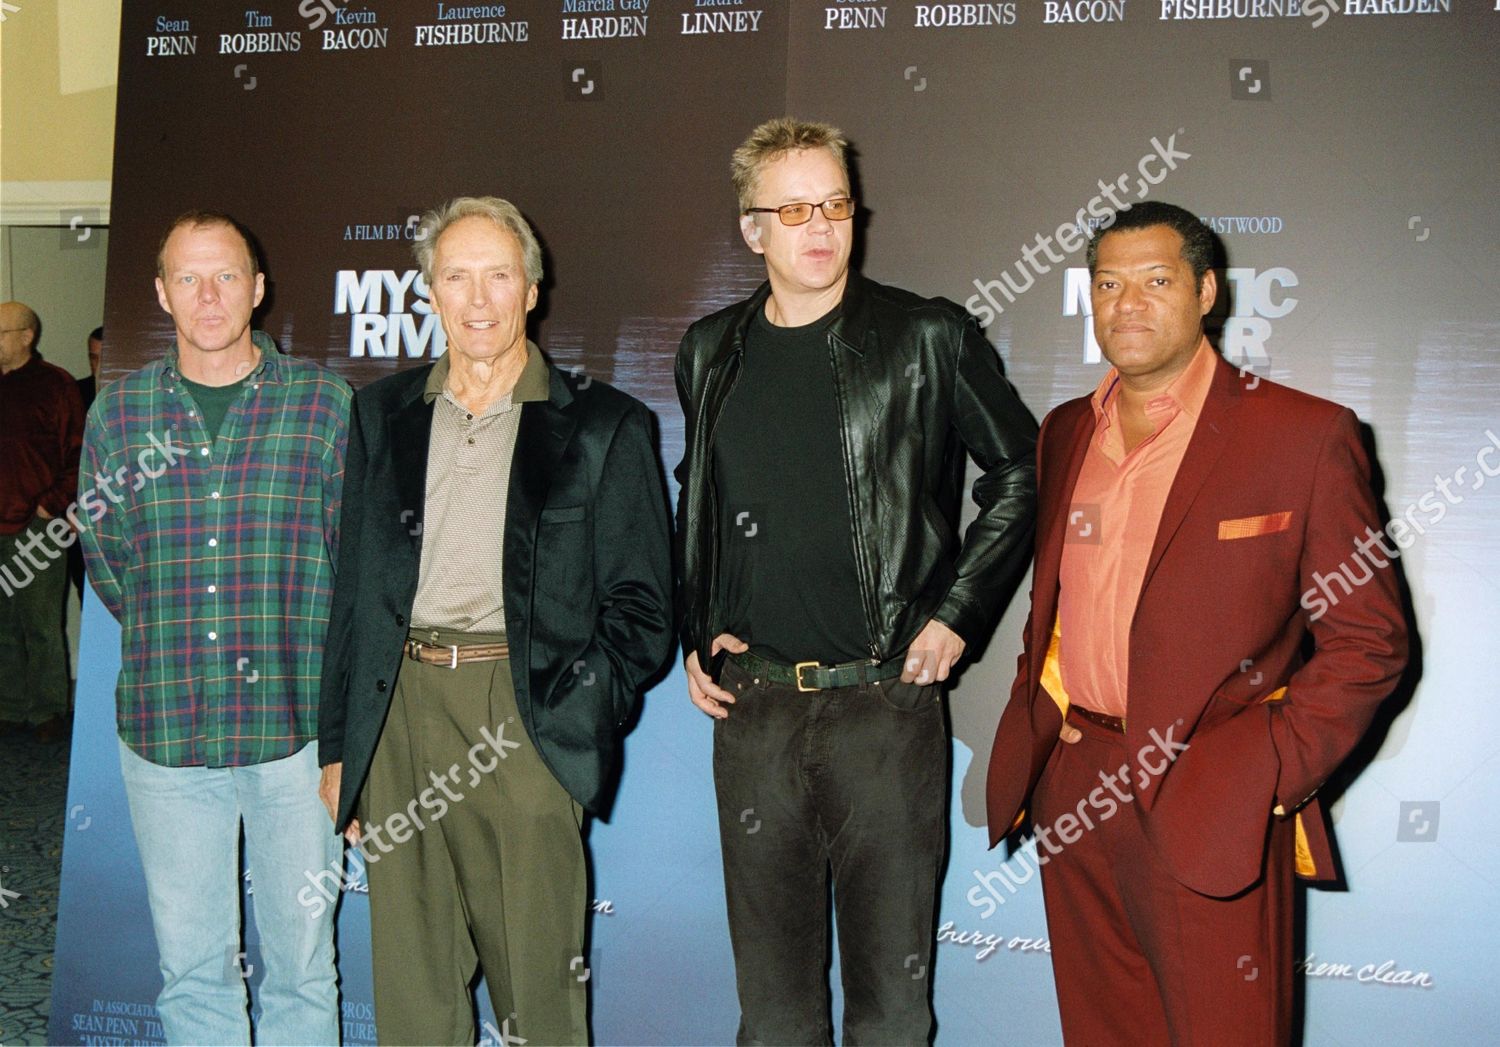 ¿Cuánto mide Tim Robbins? Mystic-river-film-photocall-and-press-conference-claridges-london-britain-shutterstock-editorial-431091c